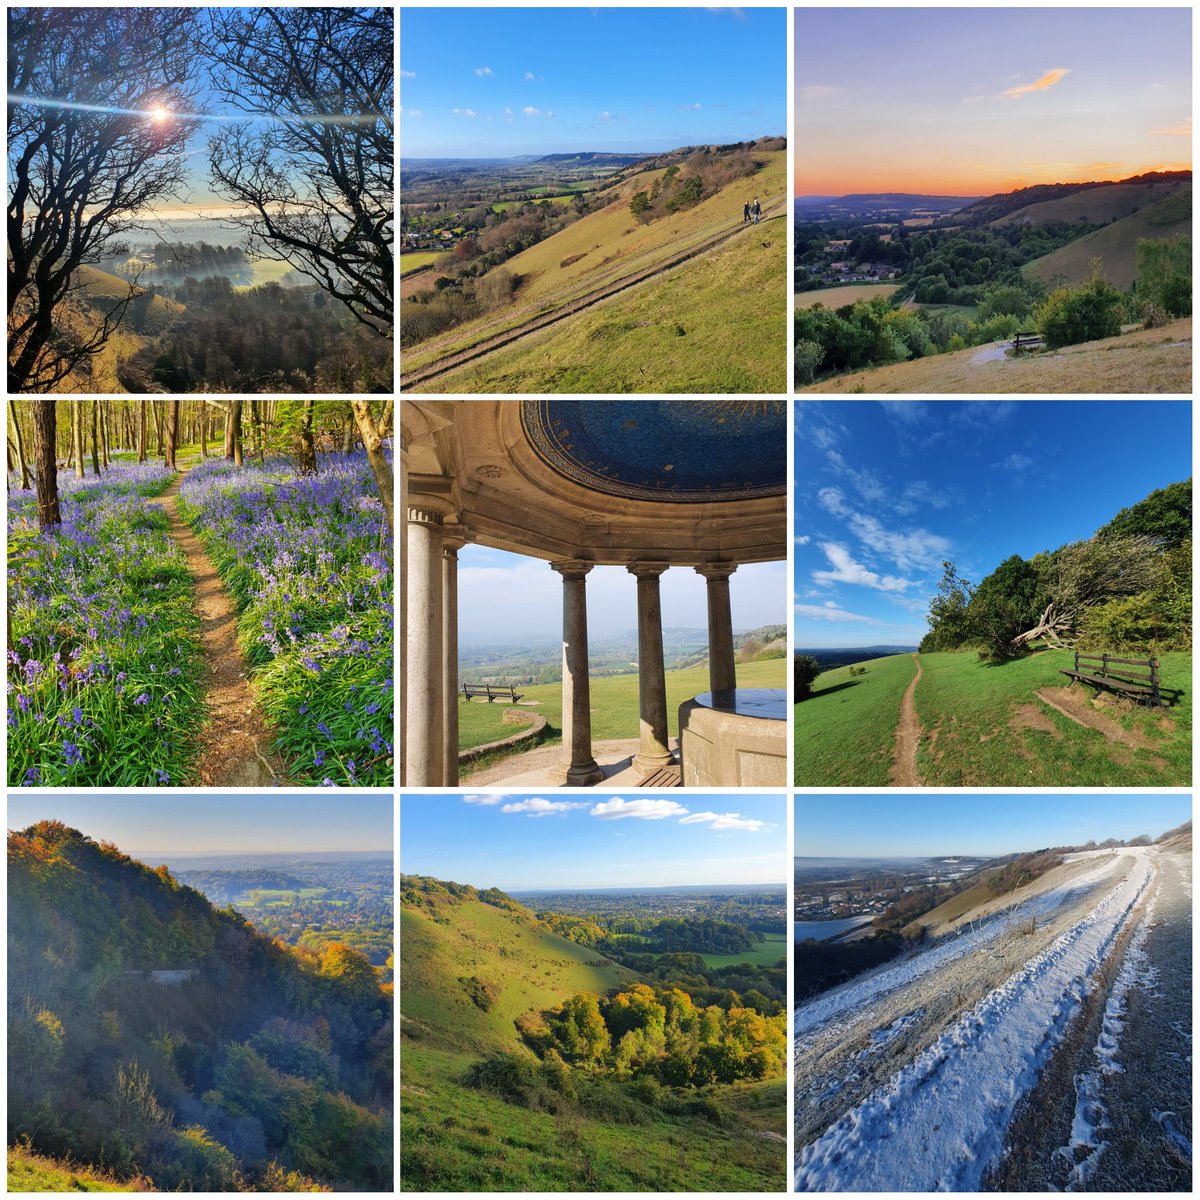 To celebrate #SurreyDay, here are a few shots of my favourite place to feel on top of the world. 🌄💚 #Reigate